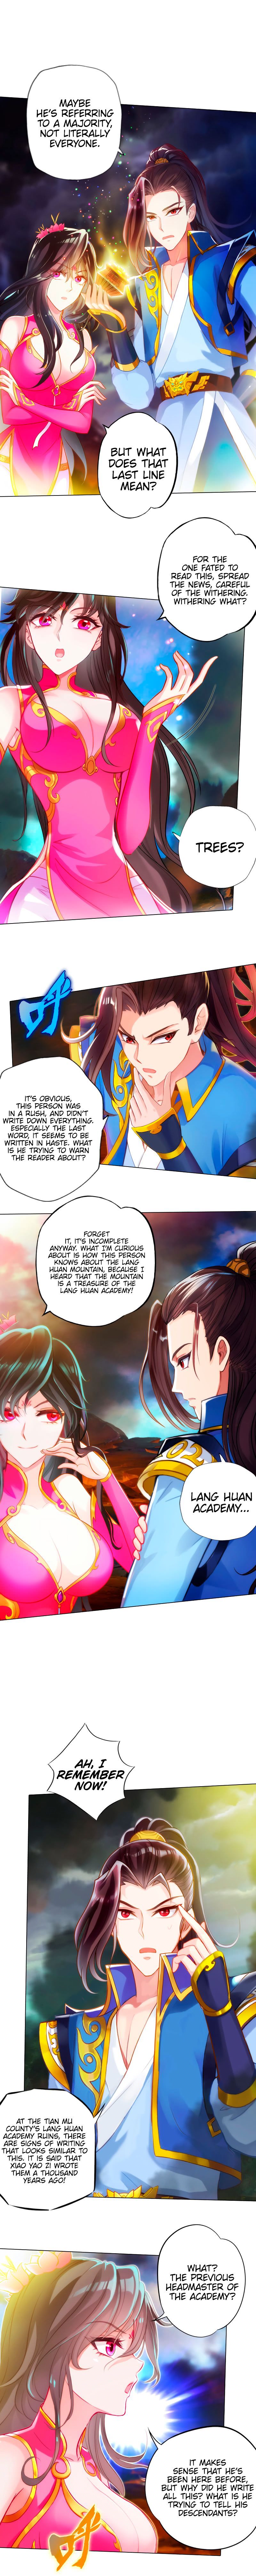 Lang Huan Library Chapter 80 page 9